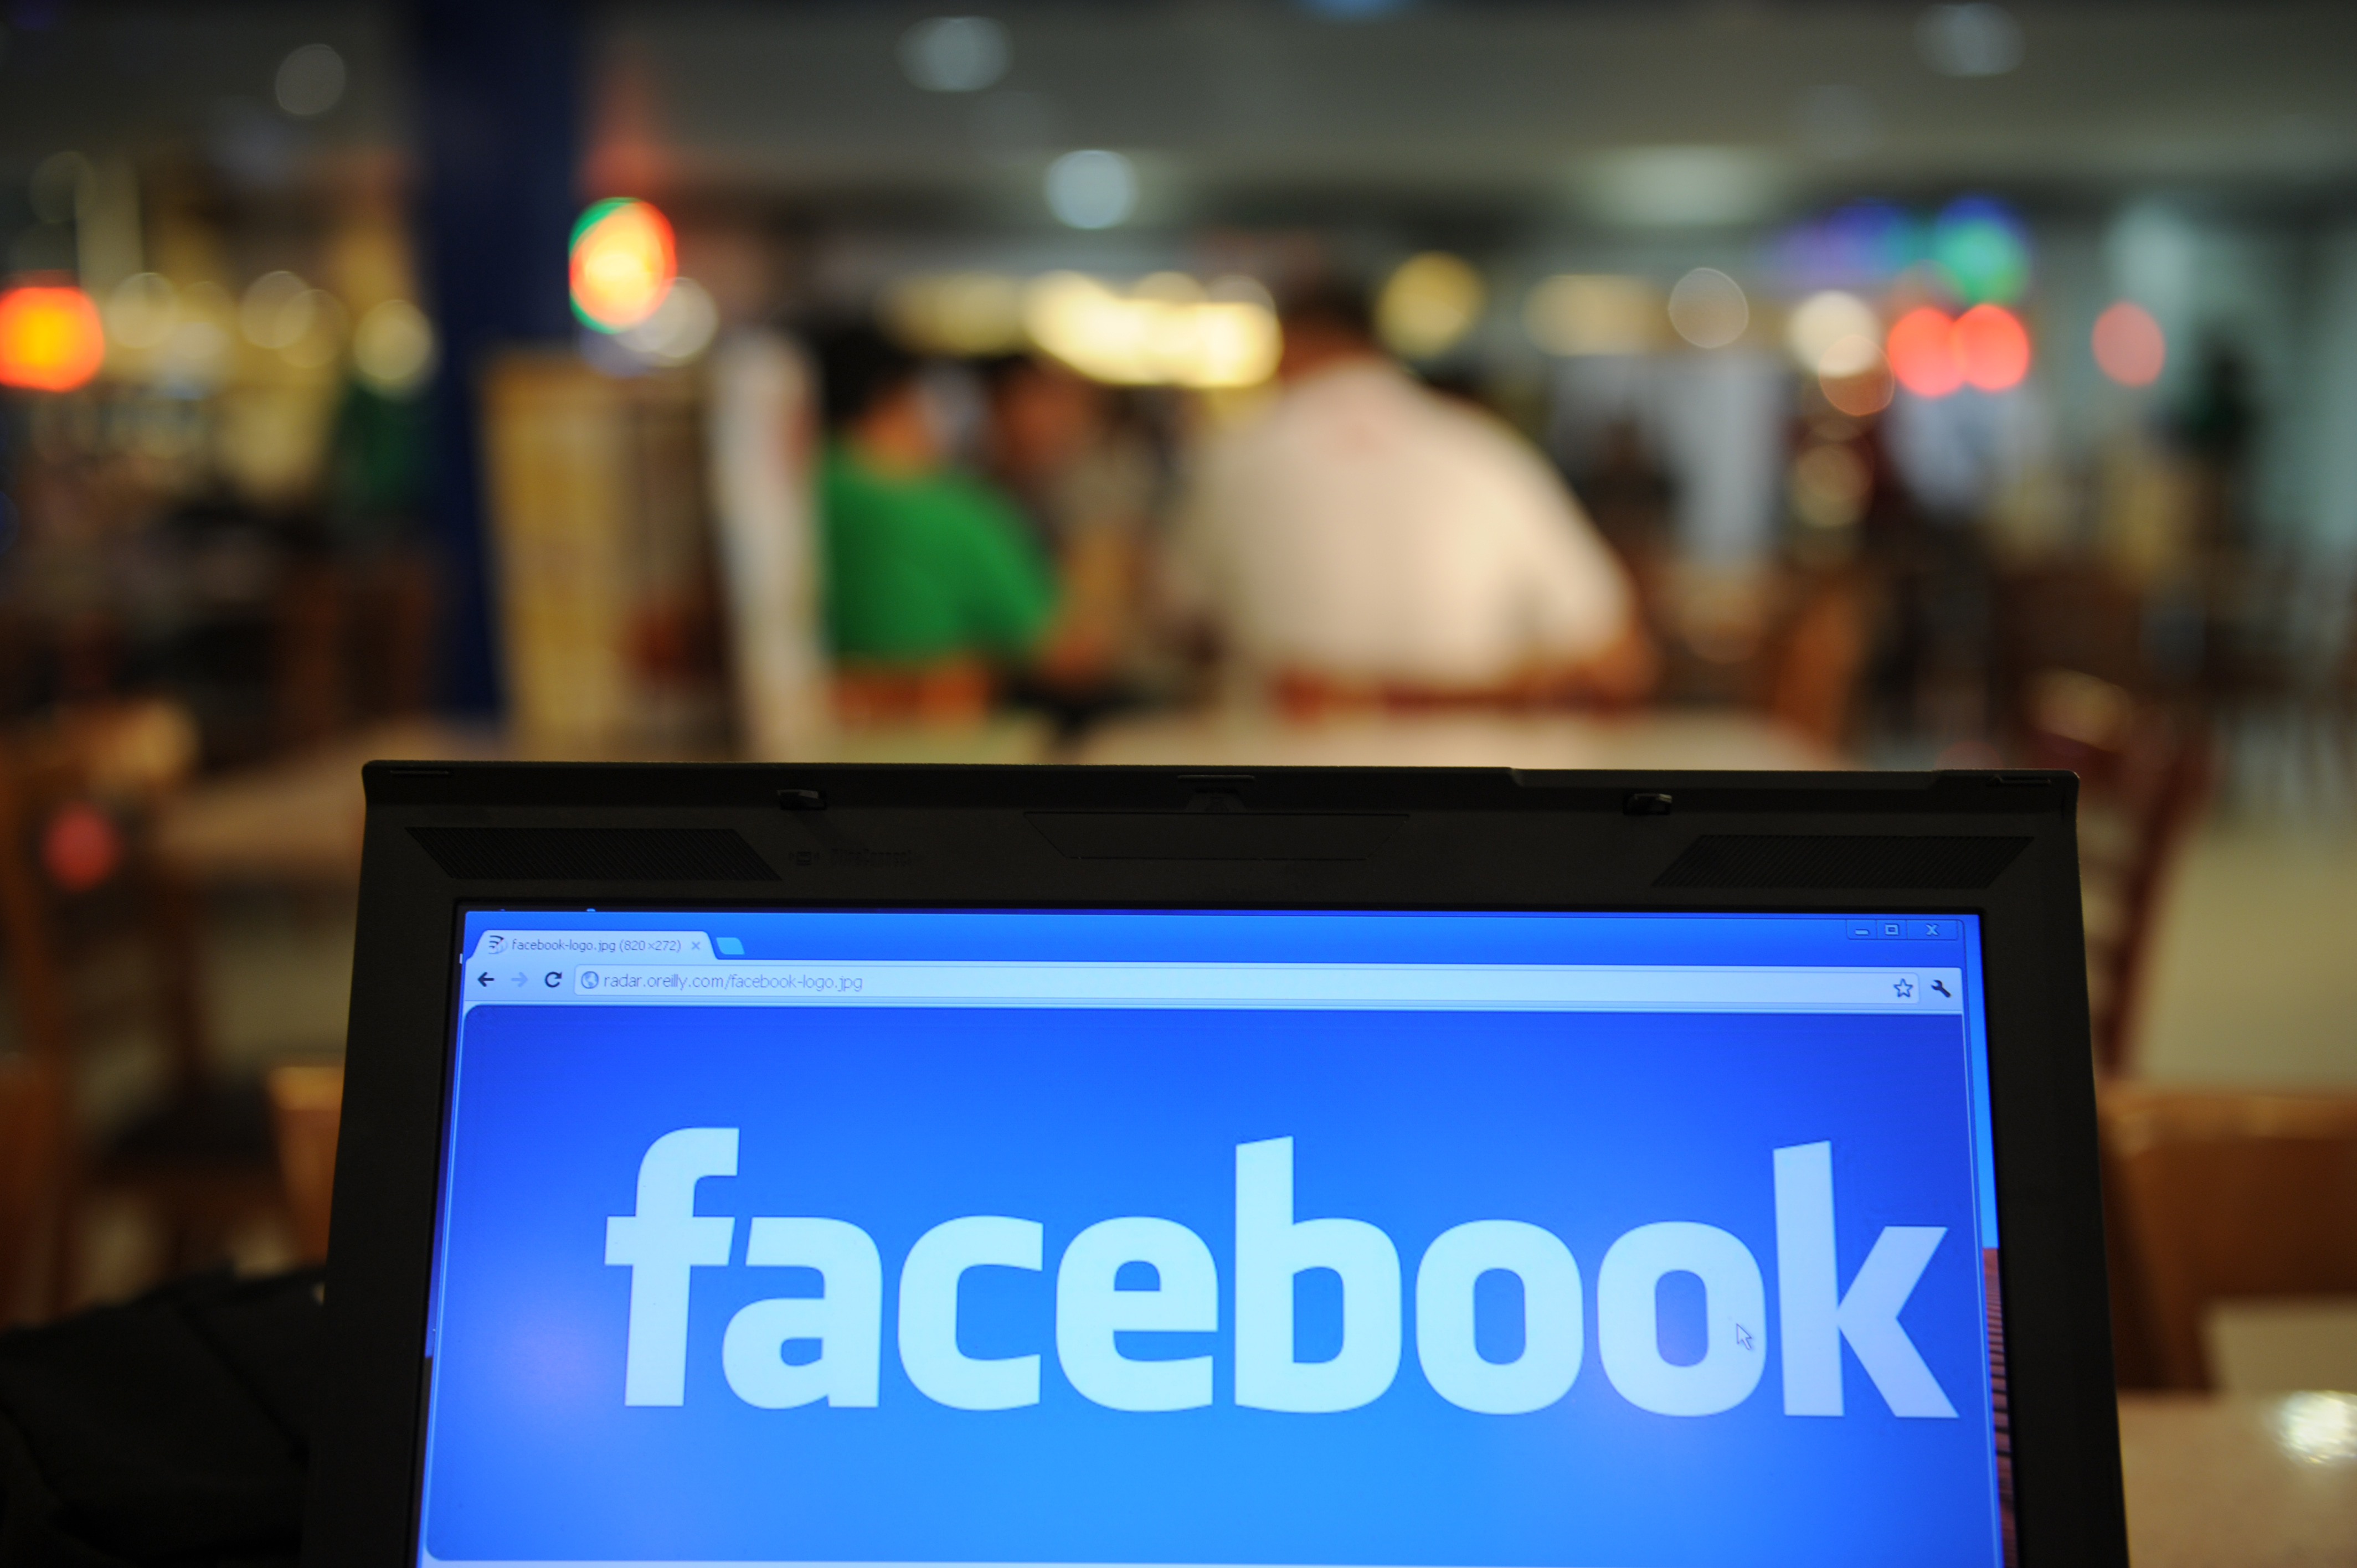 TO GO WITH US-IT-Internet-IPO-Facebook-Asia,FOCUS by Dan Martin In a picture taken on May 15, 2012, a logo of social networking facebook is displayed on a laptop screen inside a restaurant in Manila. As Facebook nears saturation levels in some Western countries, Asian users are helping drive the social-networking leader's march on the 1-billion-user milestone and beyond.  AFP PHOTO/TED ALJIBE / AFP PHOTO / TED ALJIBE